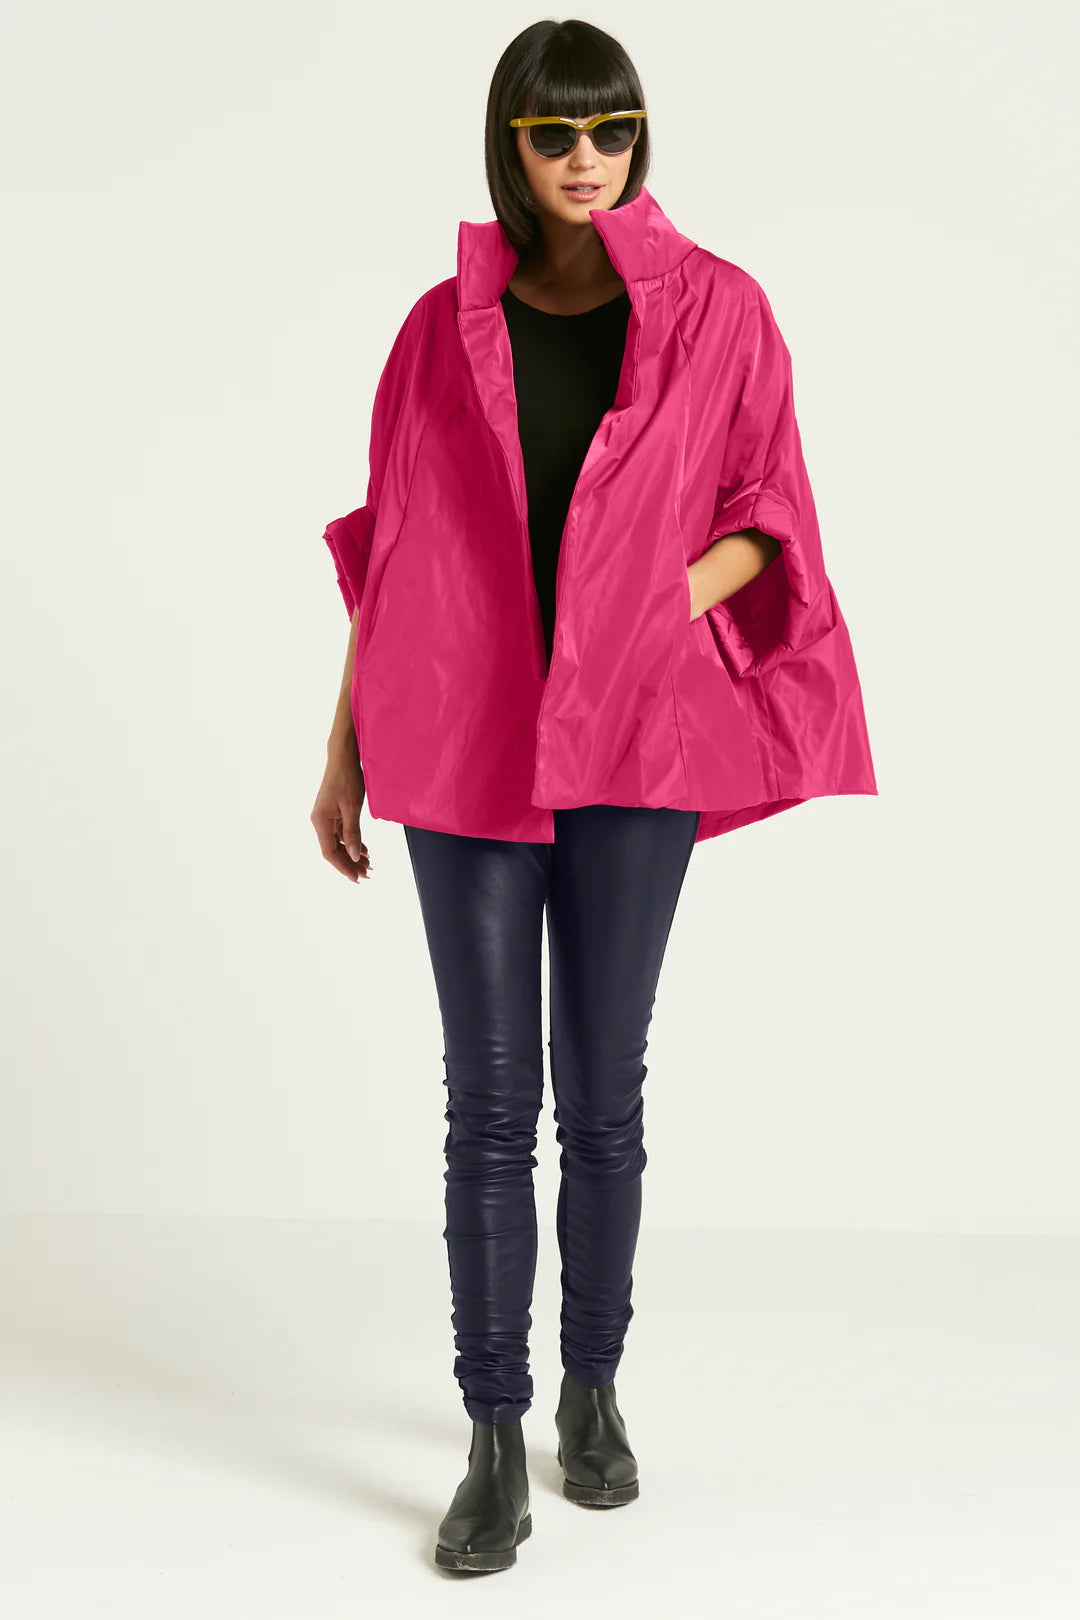 The Chic Cape- Two Colors